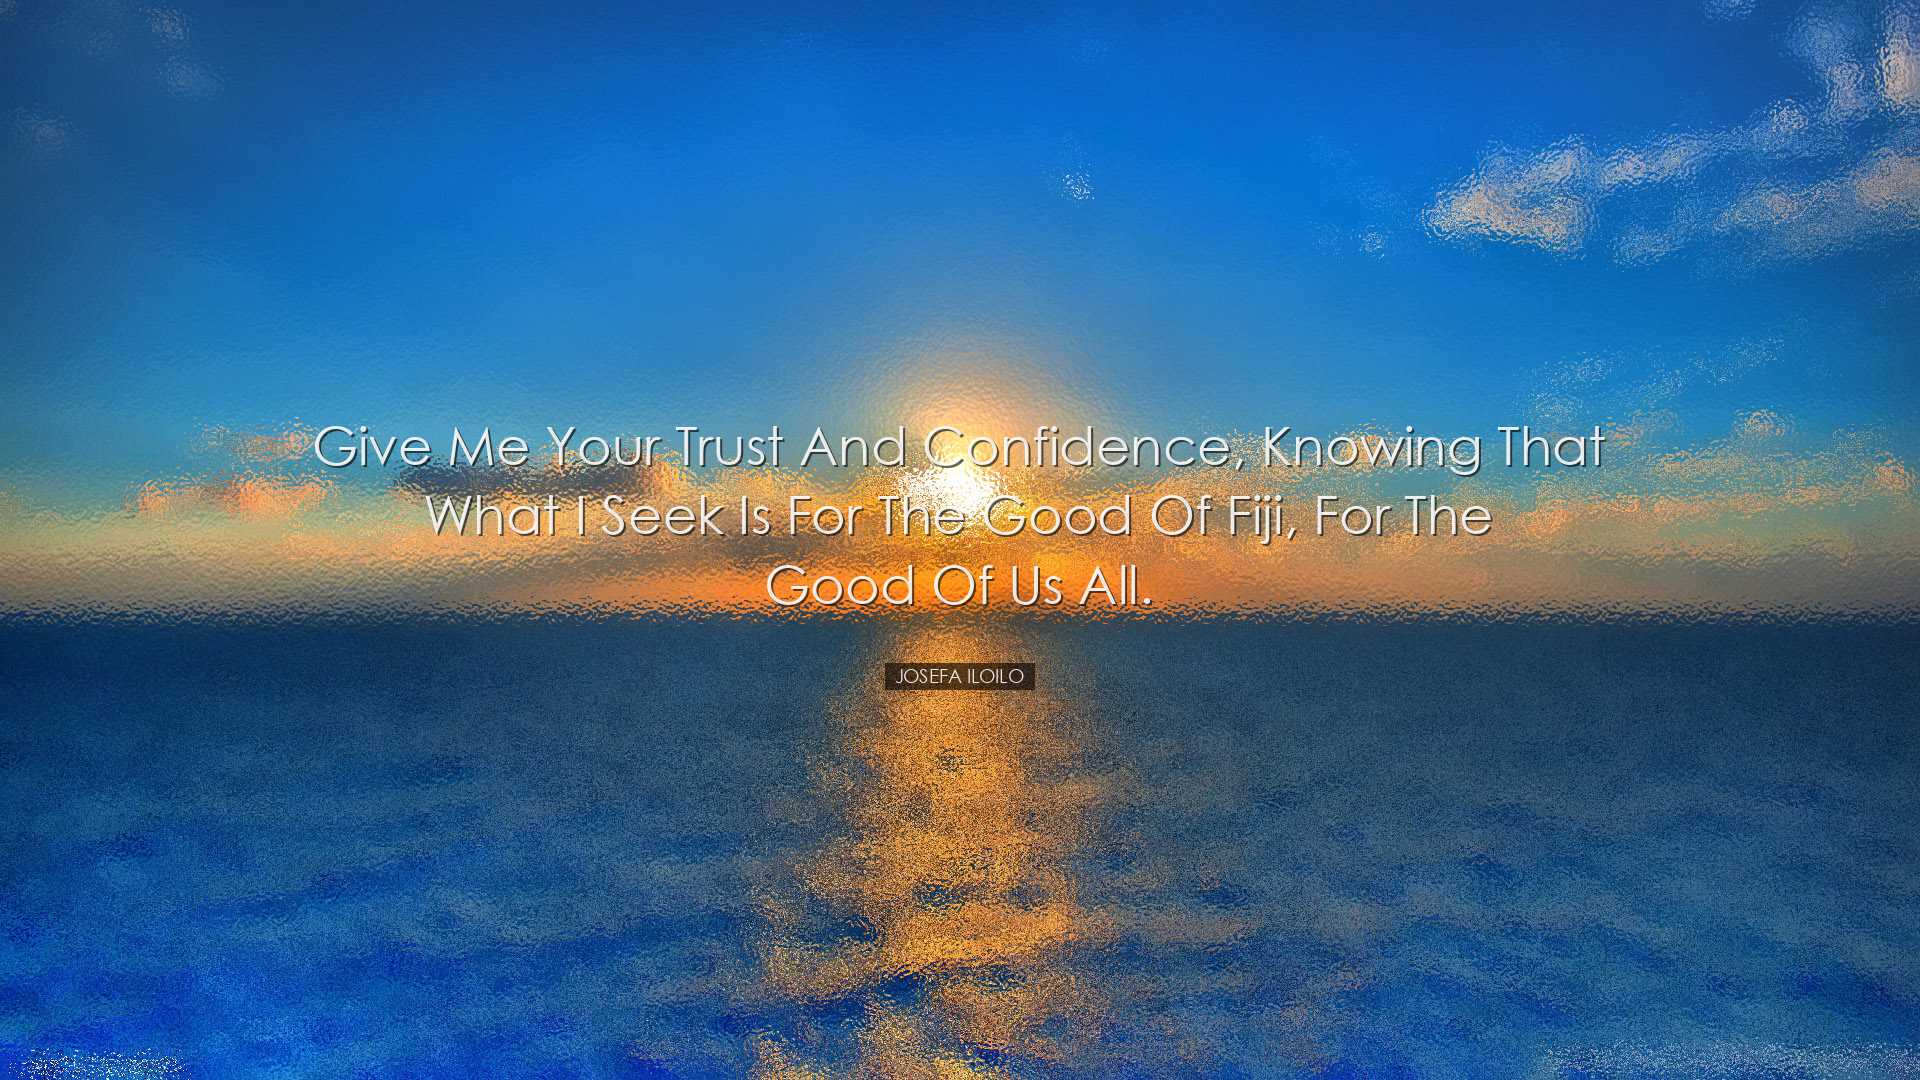 Give me your trust and confidence, knowing that what I seek is for